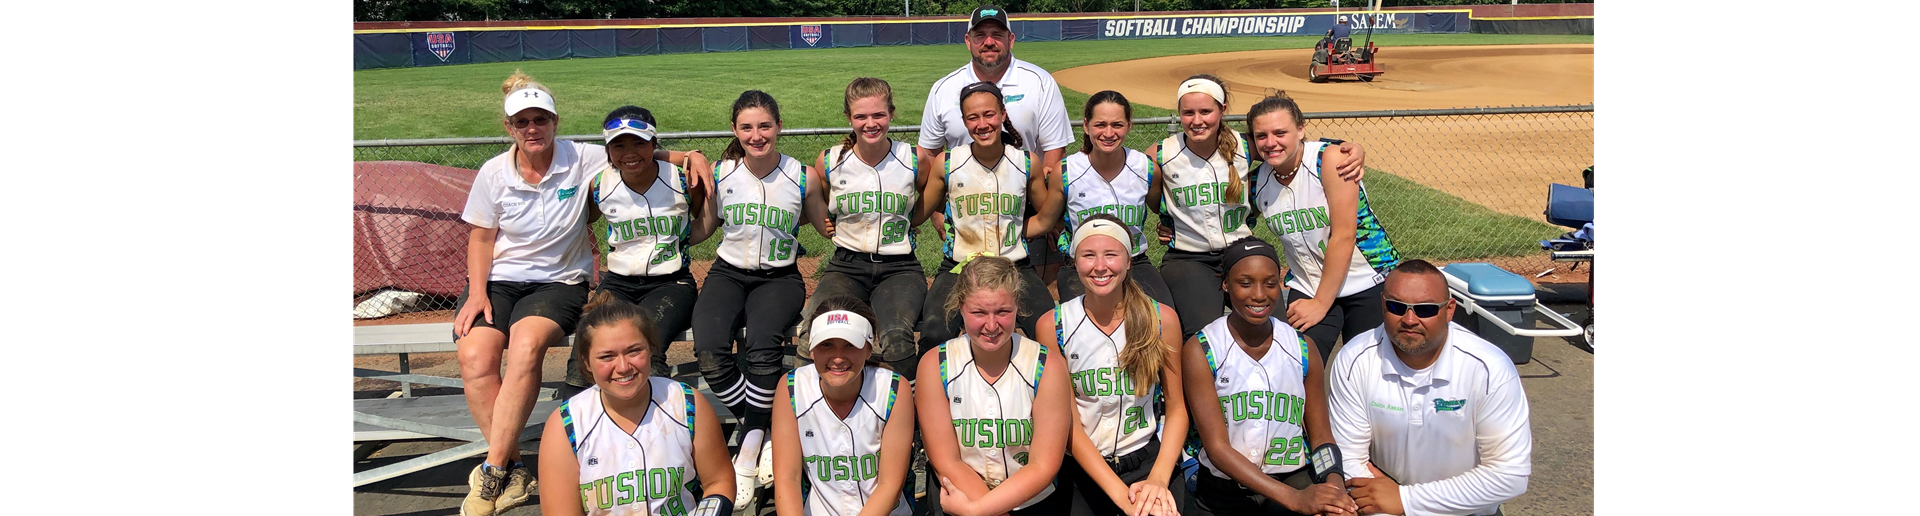 16u finishes 3rd in 16A State